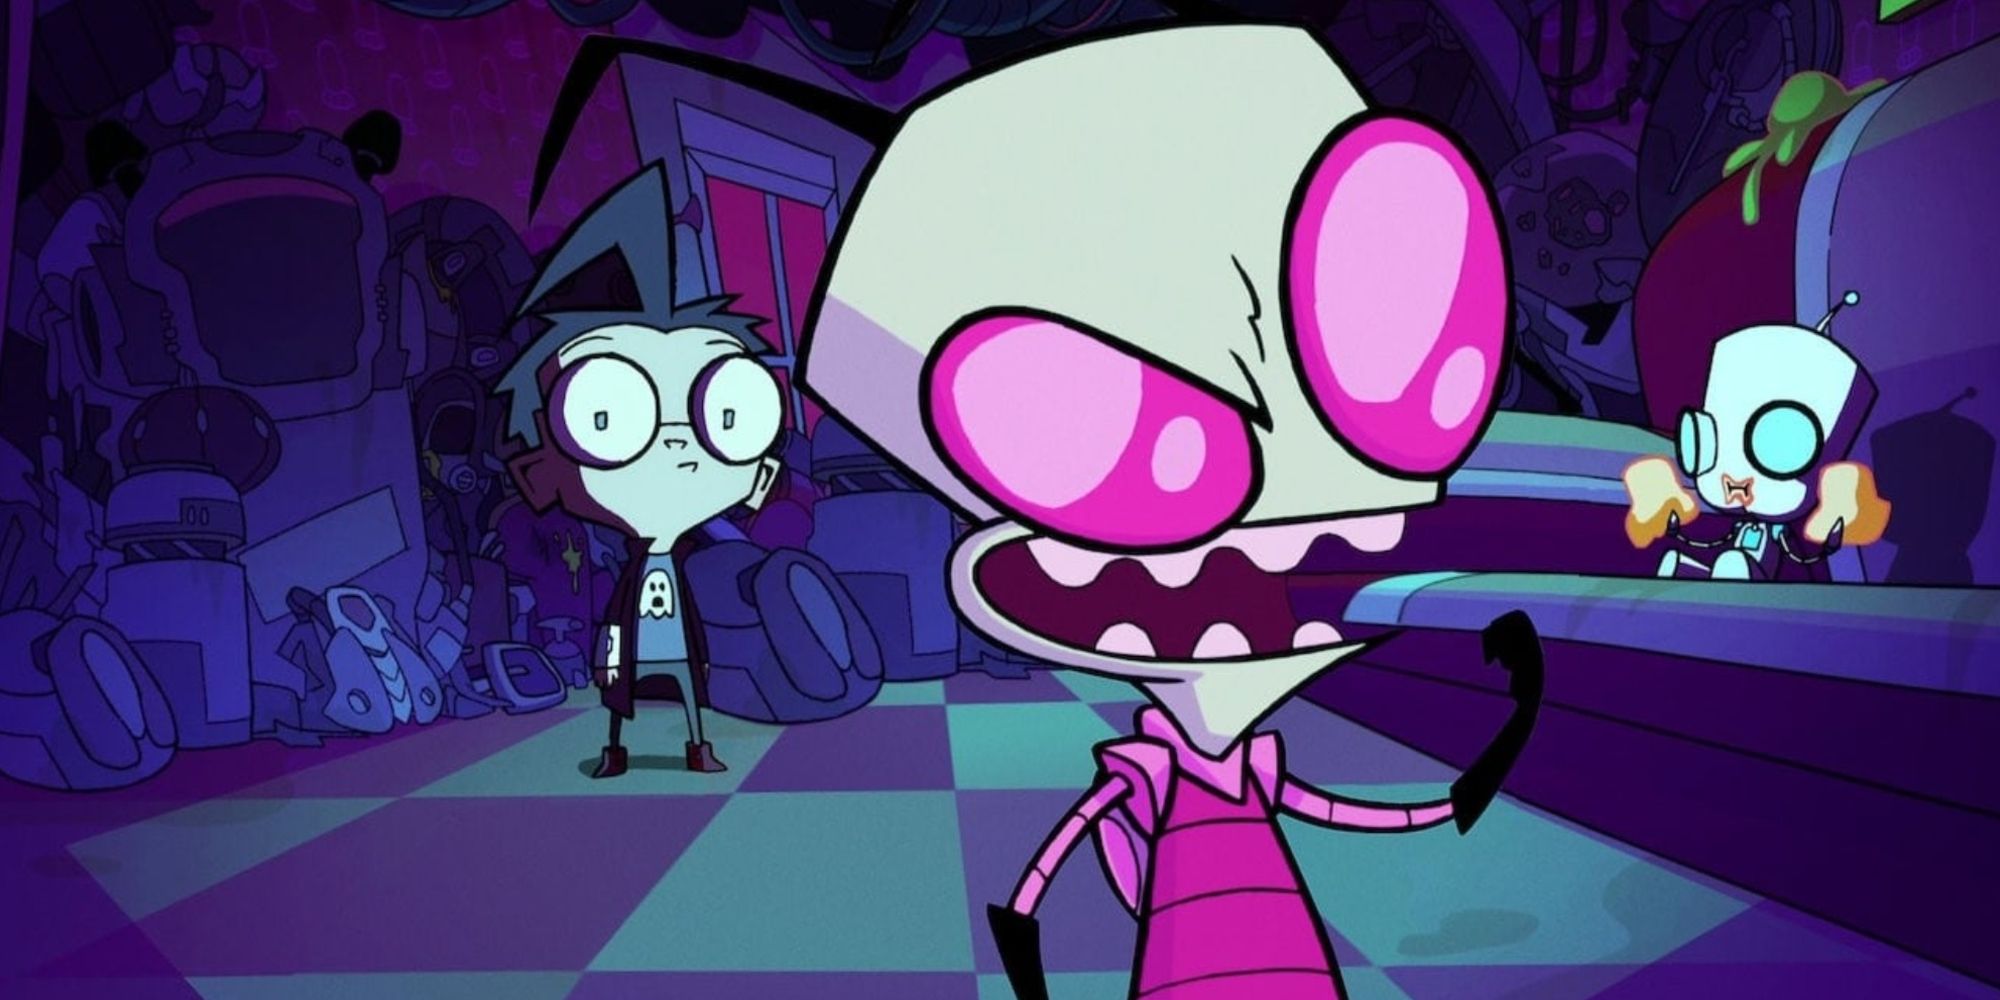 Zim laughing as two characters watch in the background in Invader Zim.